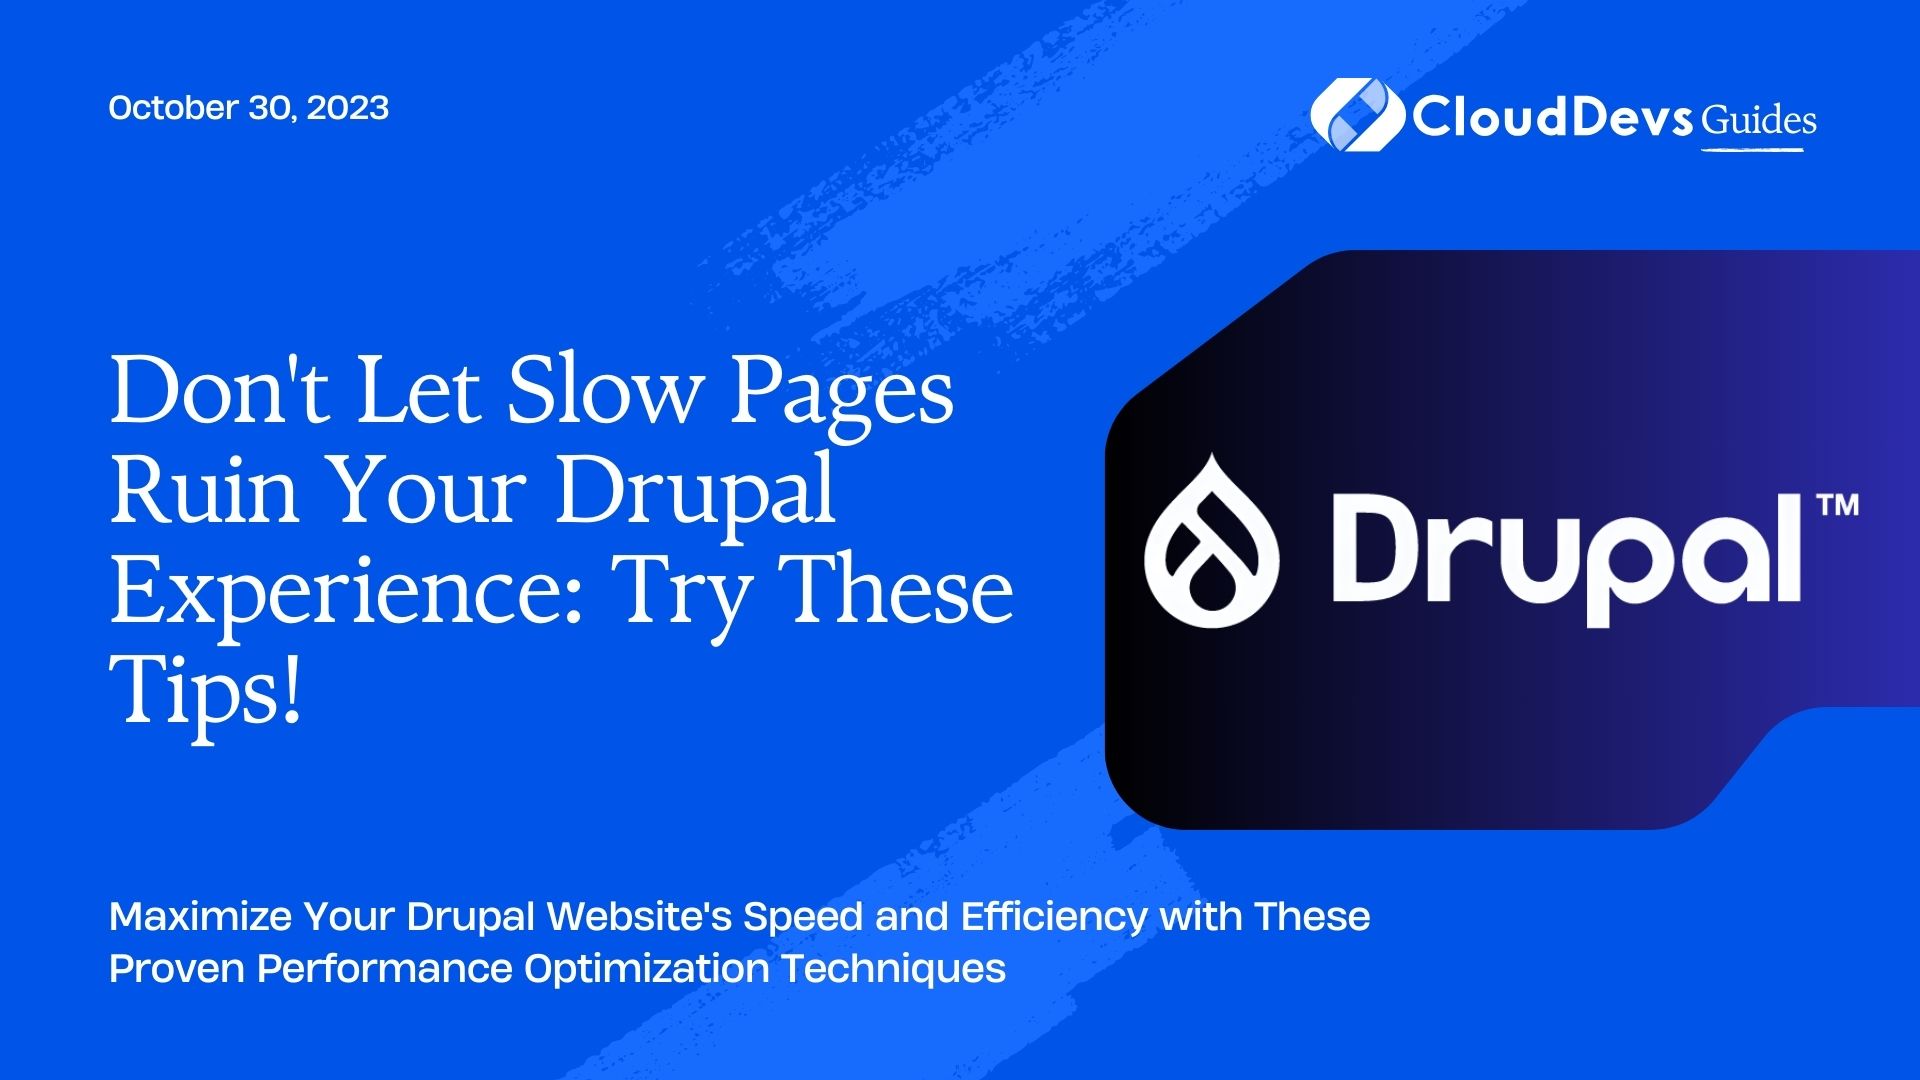 Don't Let Slow Pages Ruin Your Drupal Experience: Try These Tips!